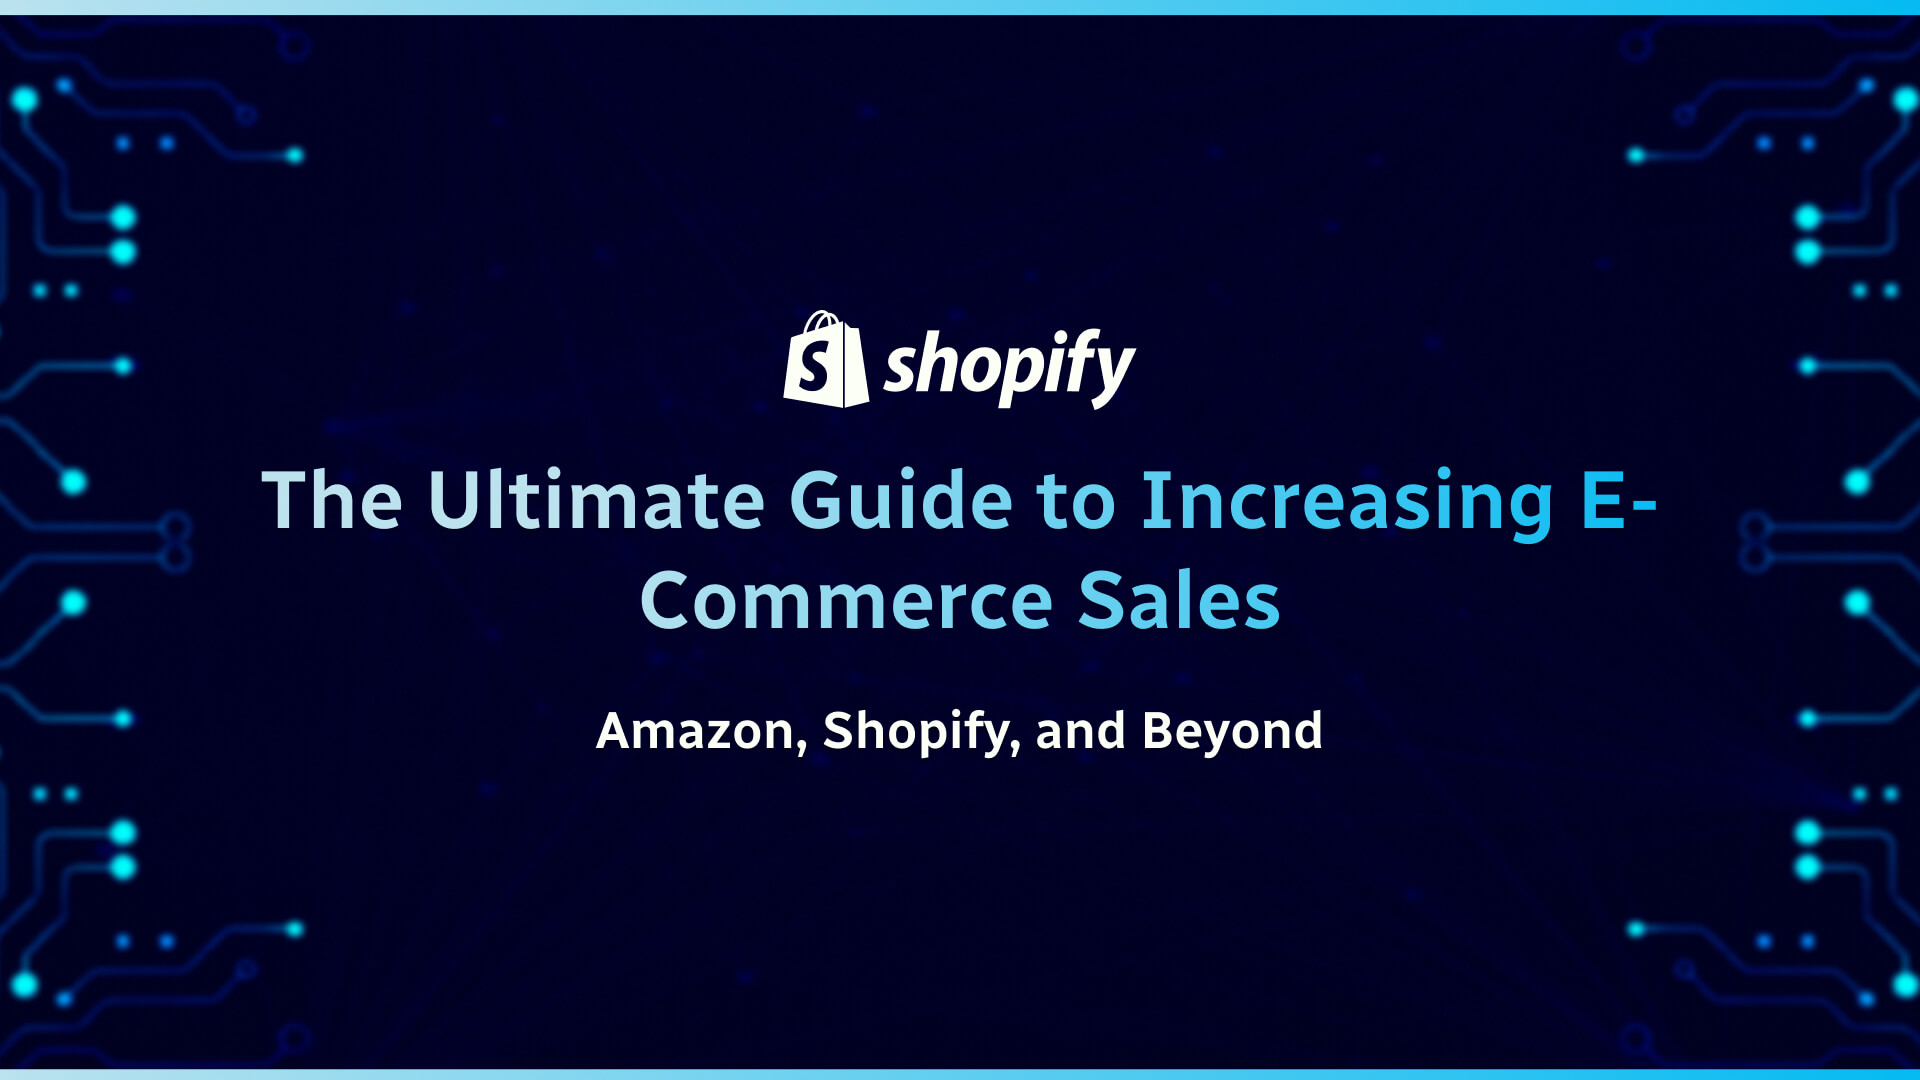 The Ultimate Guide to Increasing E-Commerce Sales_ Amazon, Shopify, and Beyond